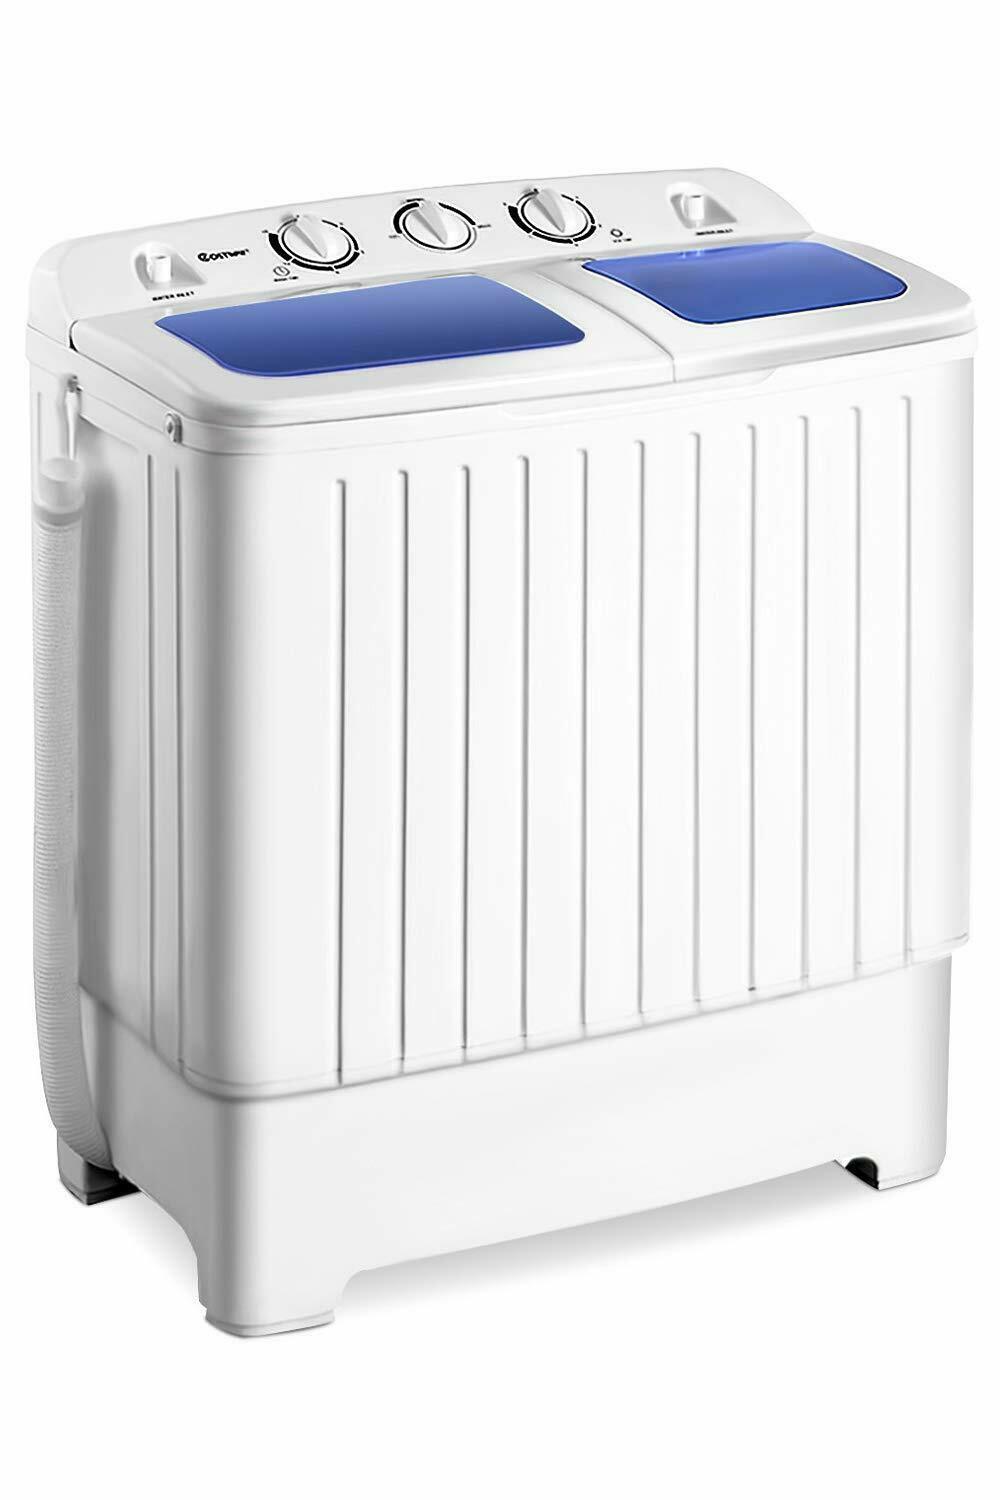 11lb-compact-washer-6lb-spin-dryer-combo-portable-space-saver-laundry